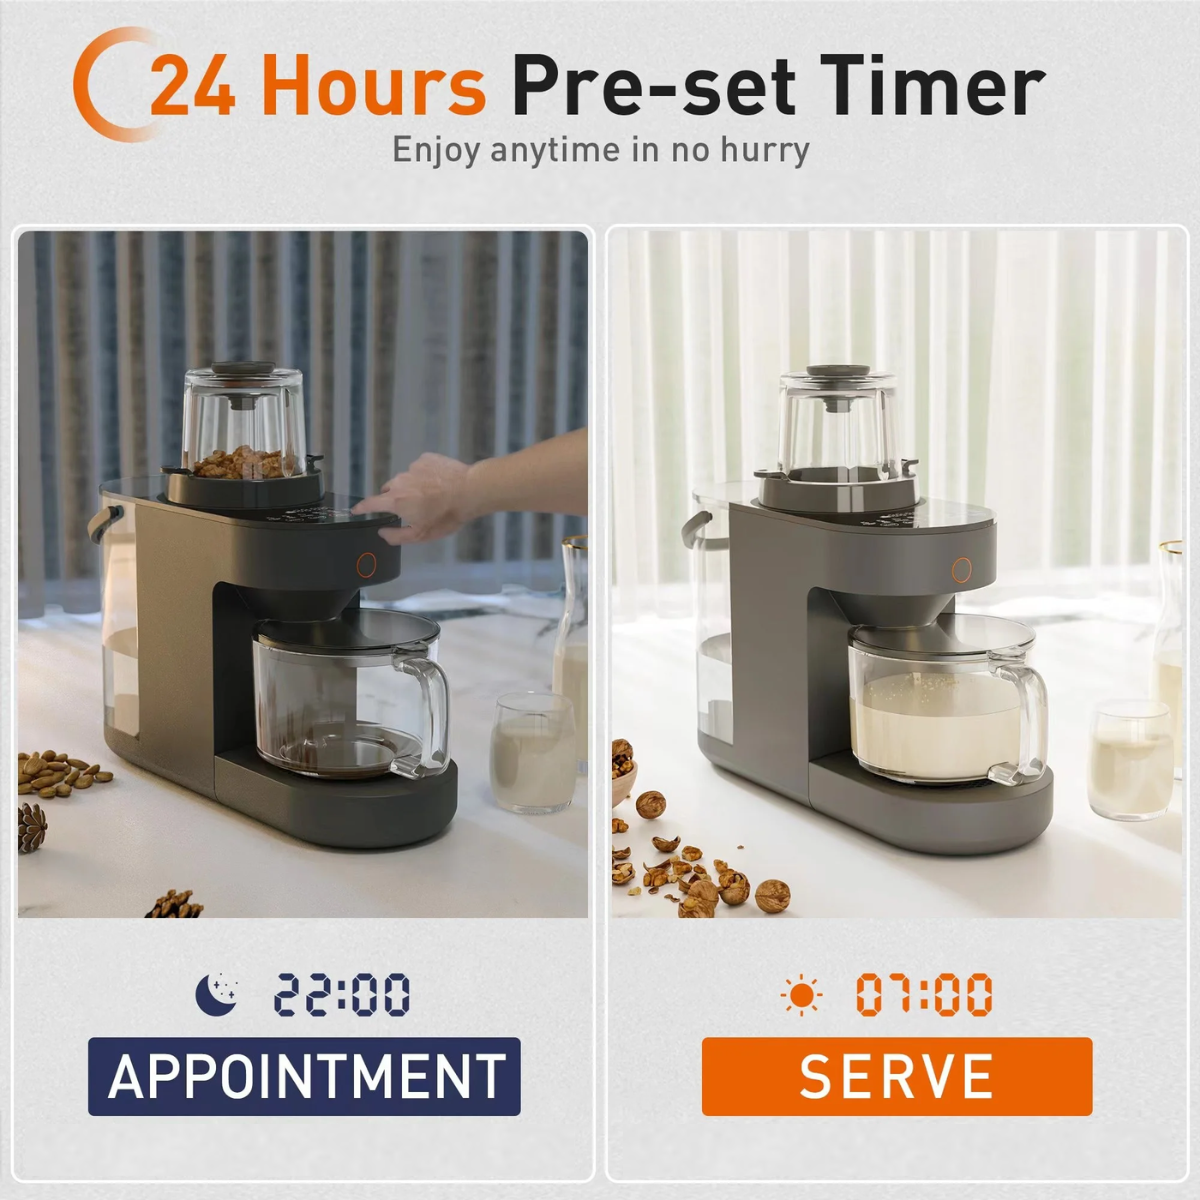 blenders for kitchen can preset time